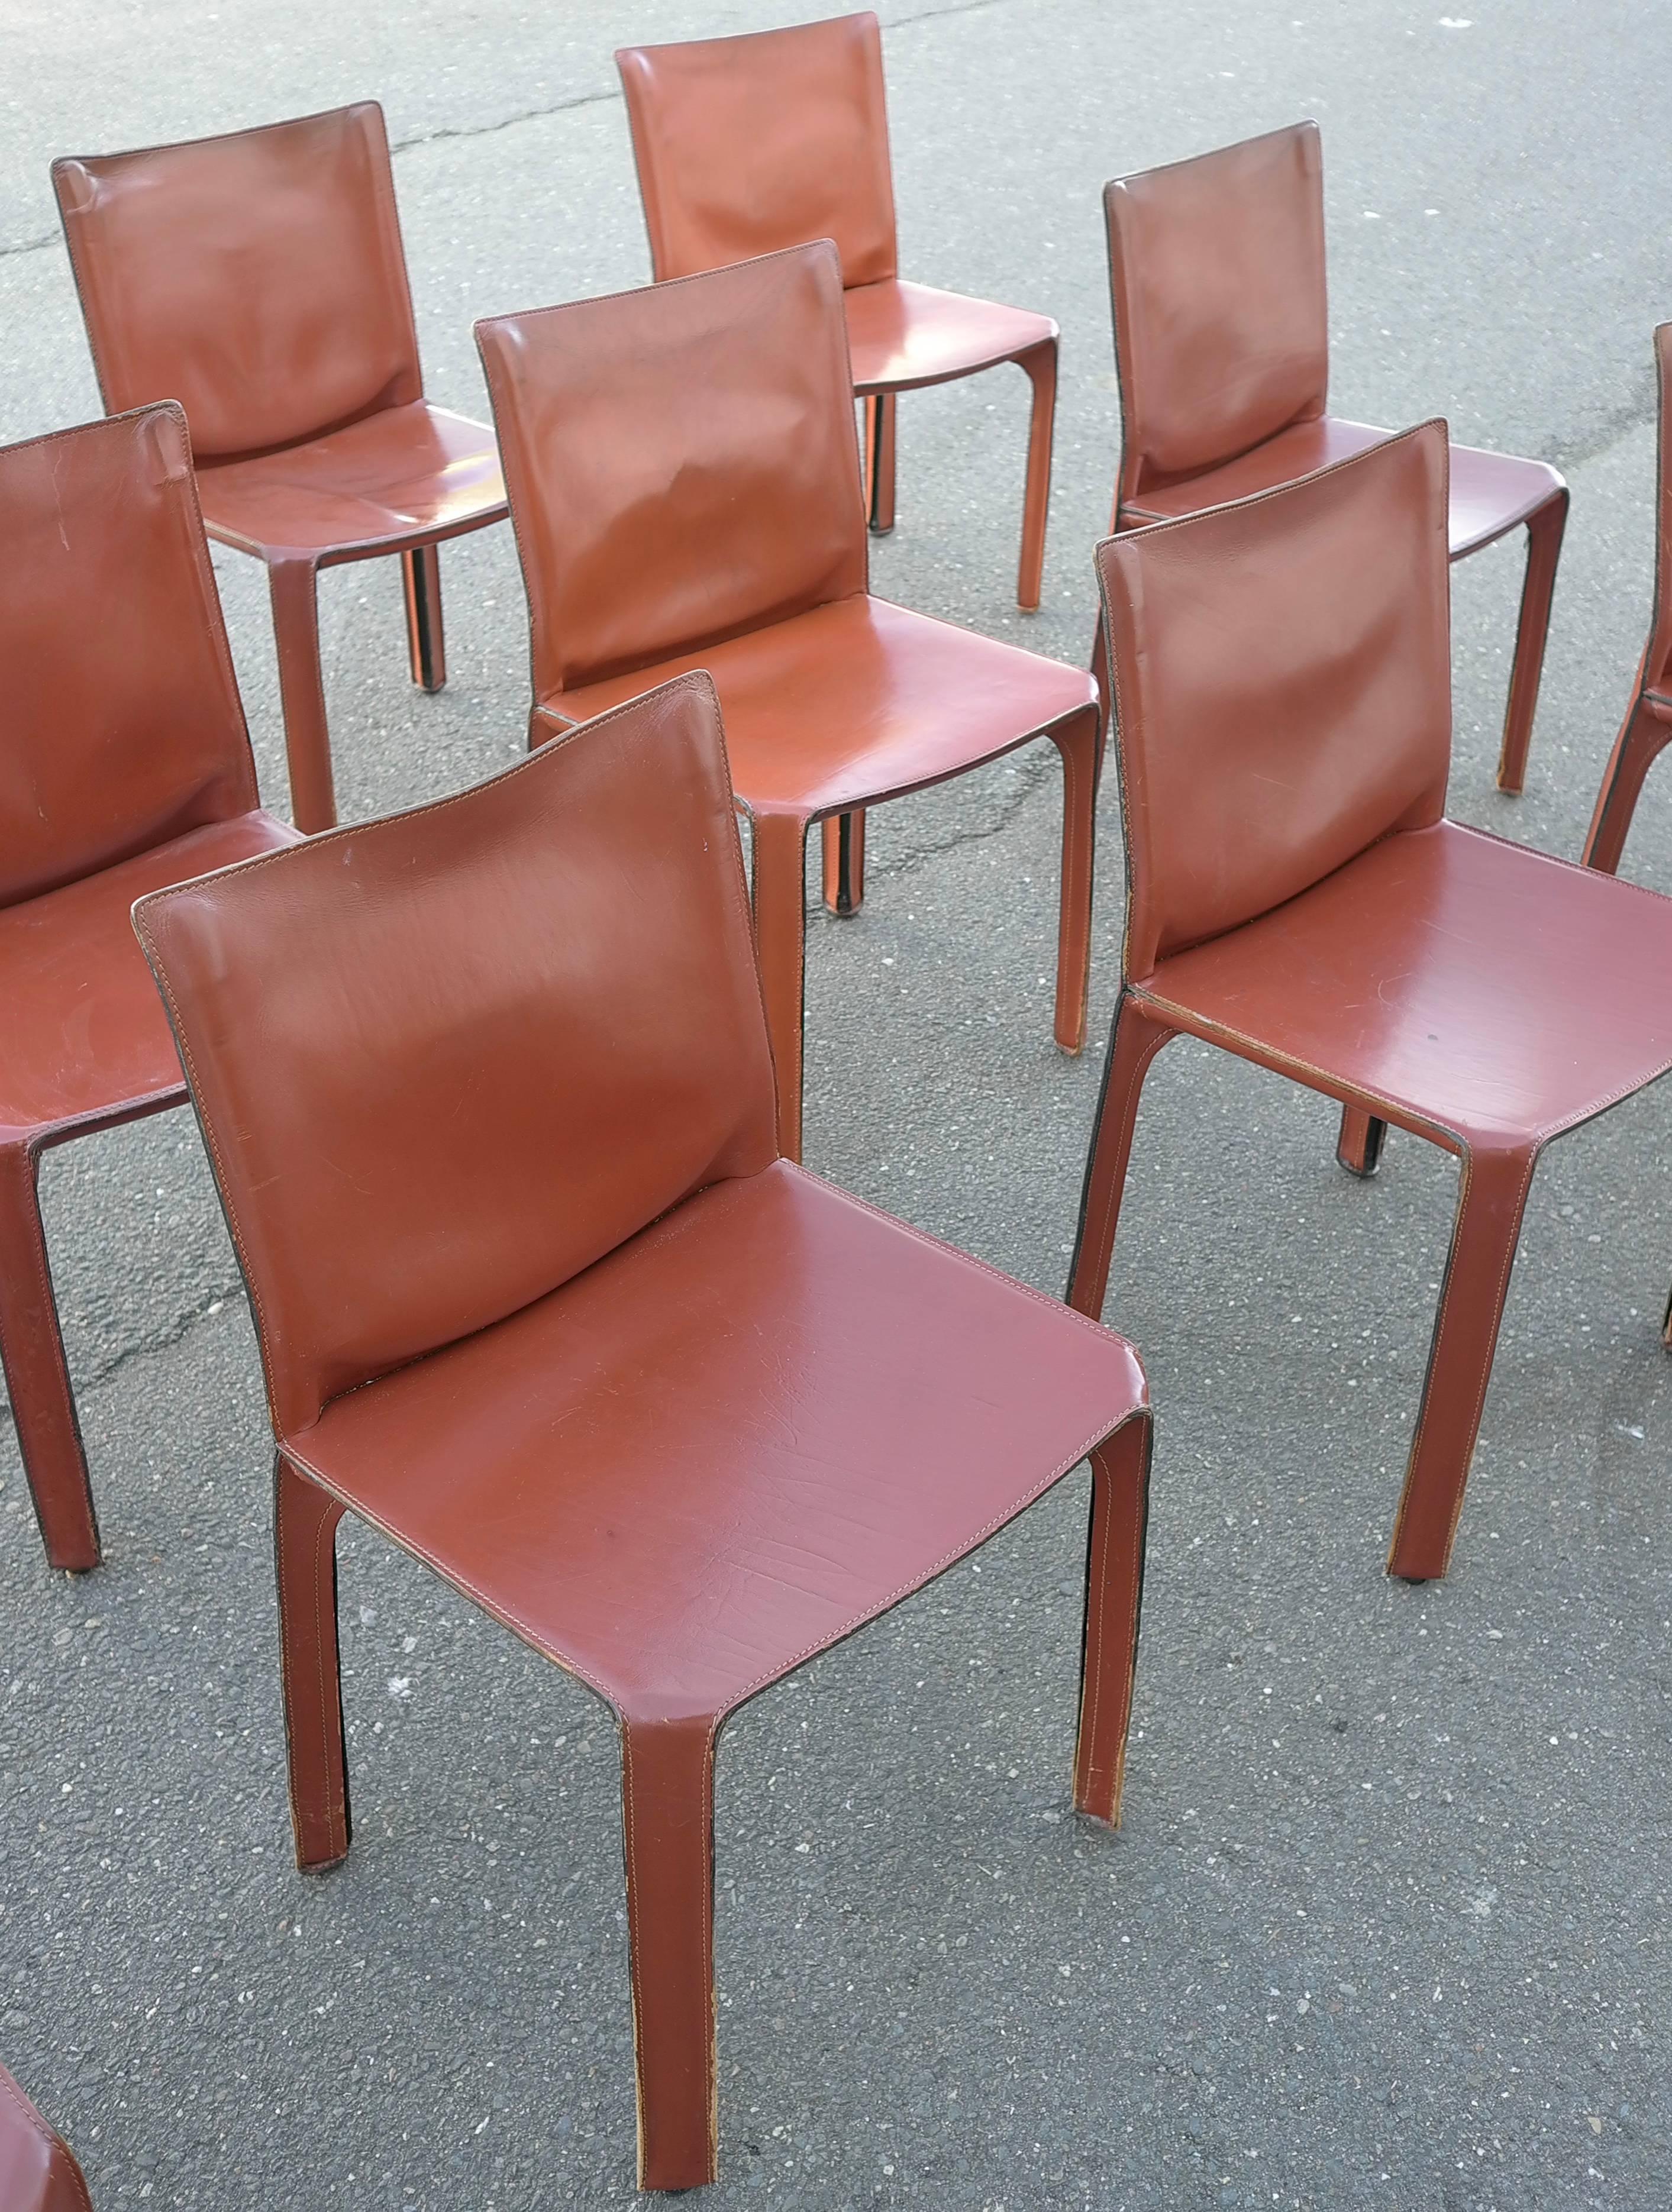 Large set of 15 leather 412 Cab chairs by Mario Bellini for Cassina.

Wonderful original patina and wear. Broken in like your favourite baseball glove. They have various patina, stains, rubs, scratches and wear. And we wouldn't have it any other